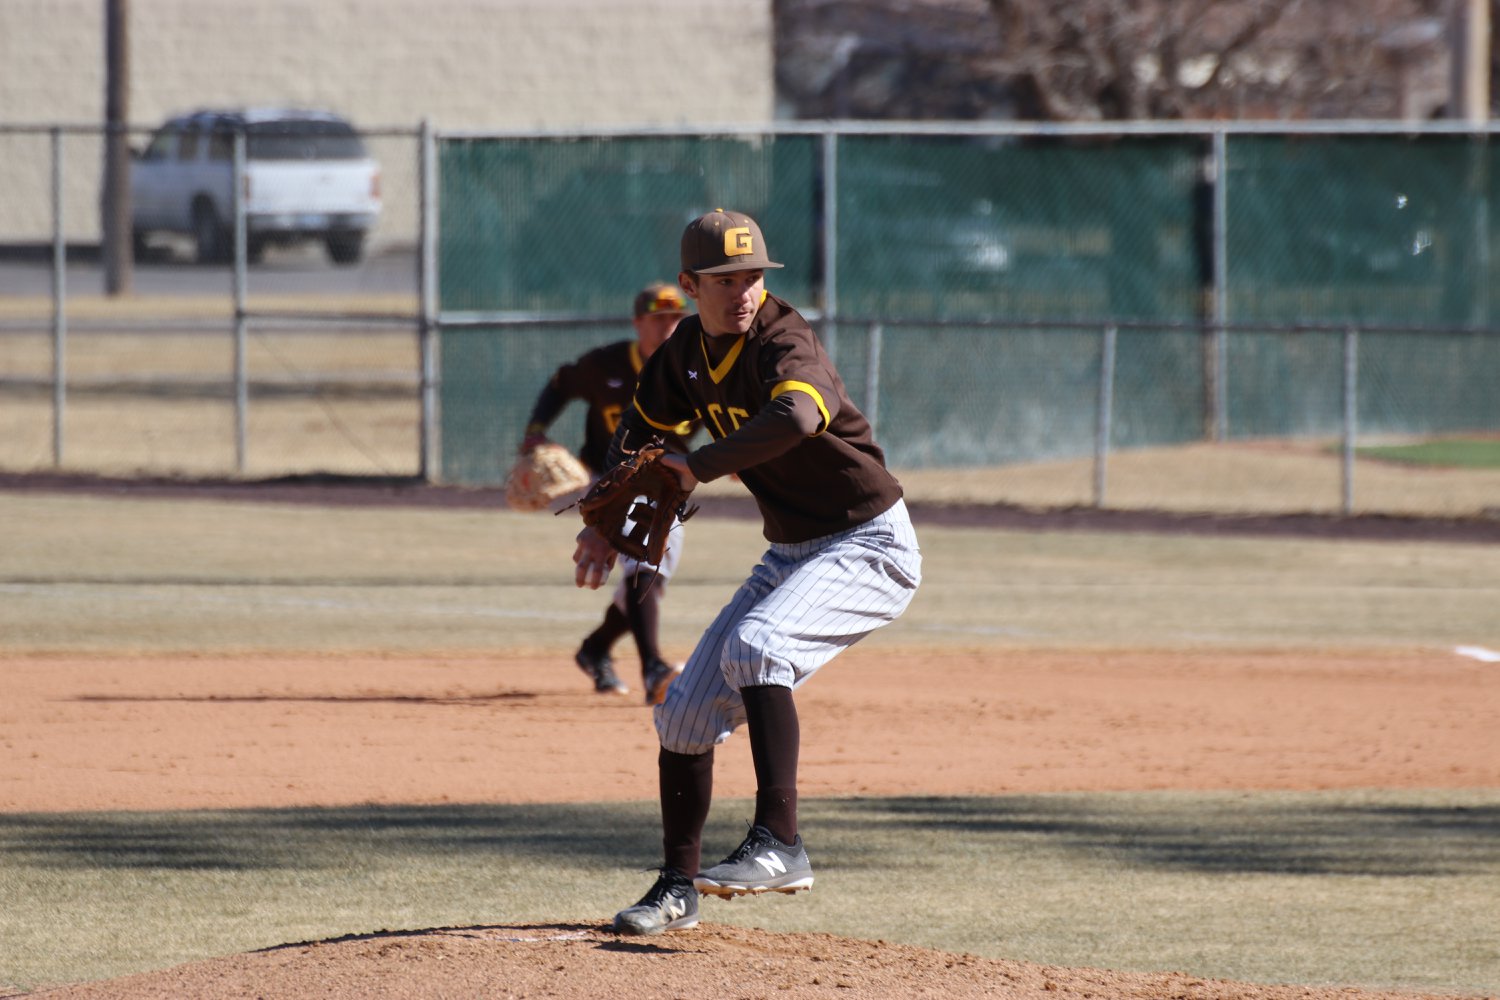 Broncbusters snag two, come-from-behind wins over Western Nebraska